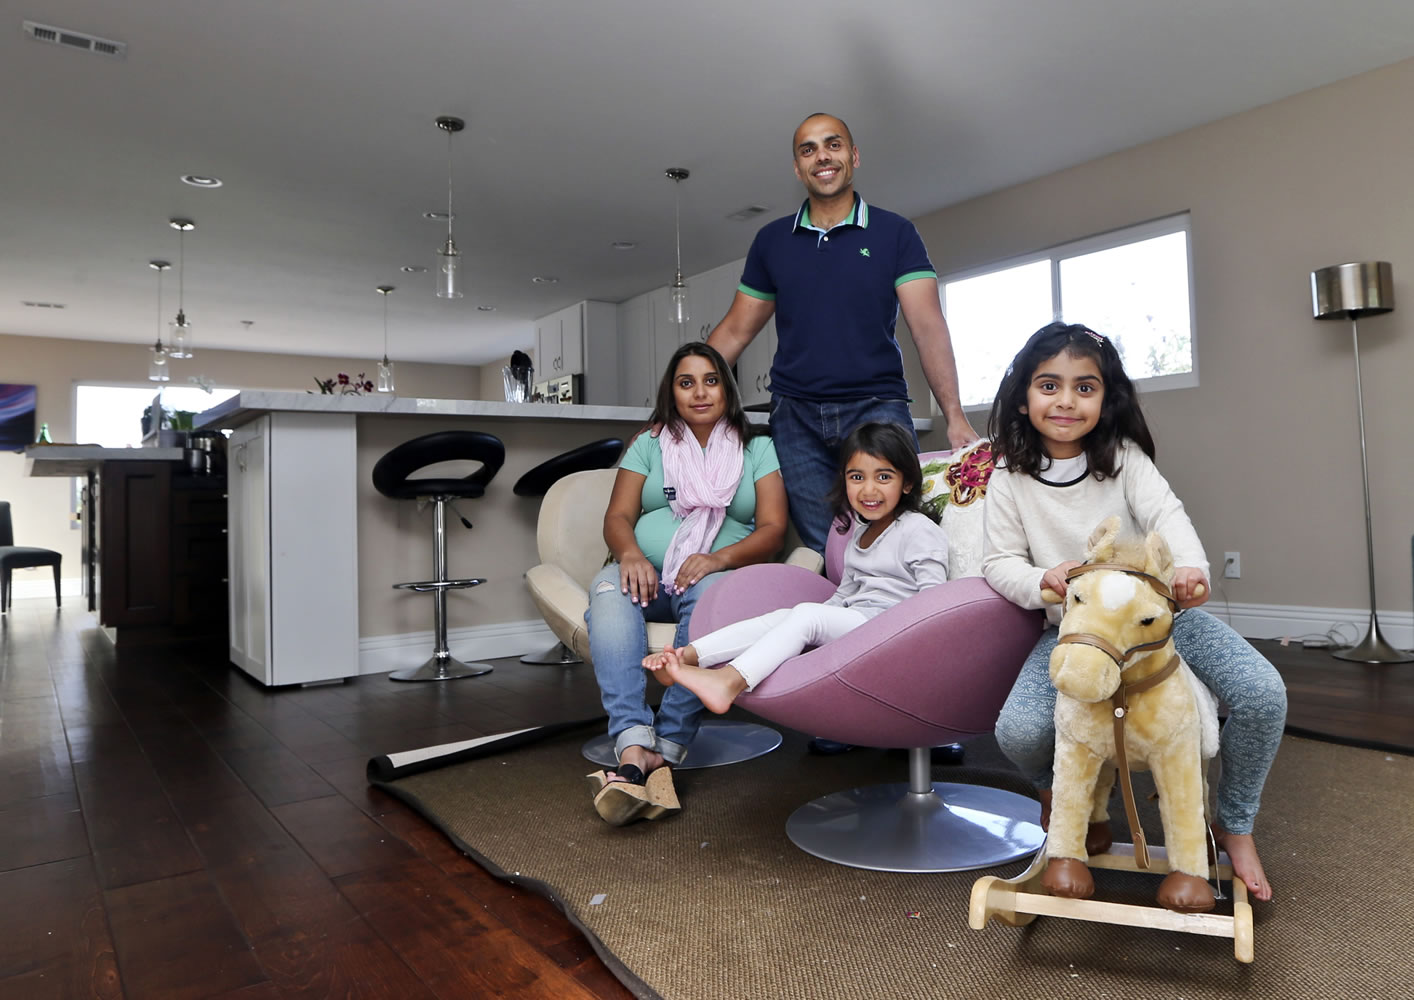 The Jaswal family, Imran, standing, his wife Aniqa, left, and daughters, Arissa, right, and Jayda, gather in the family room at their home in La Jolla, Calif. The couple bought the four-bedroom house about 10 minutes from the beach in Febrauary.